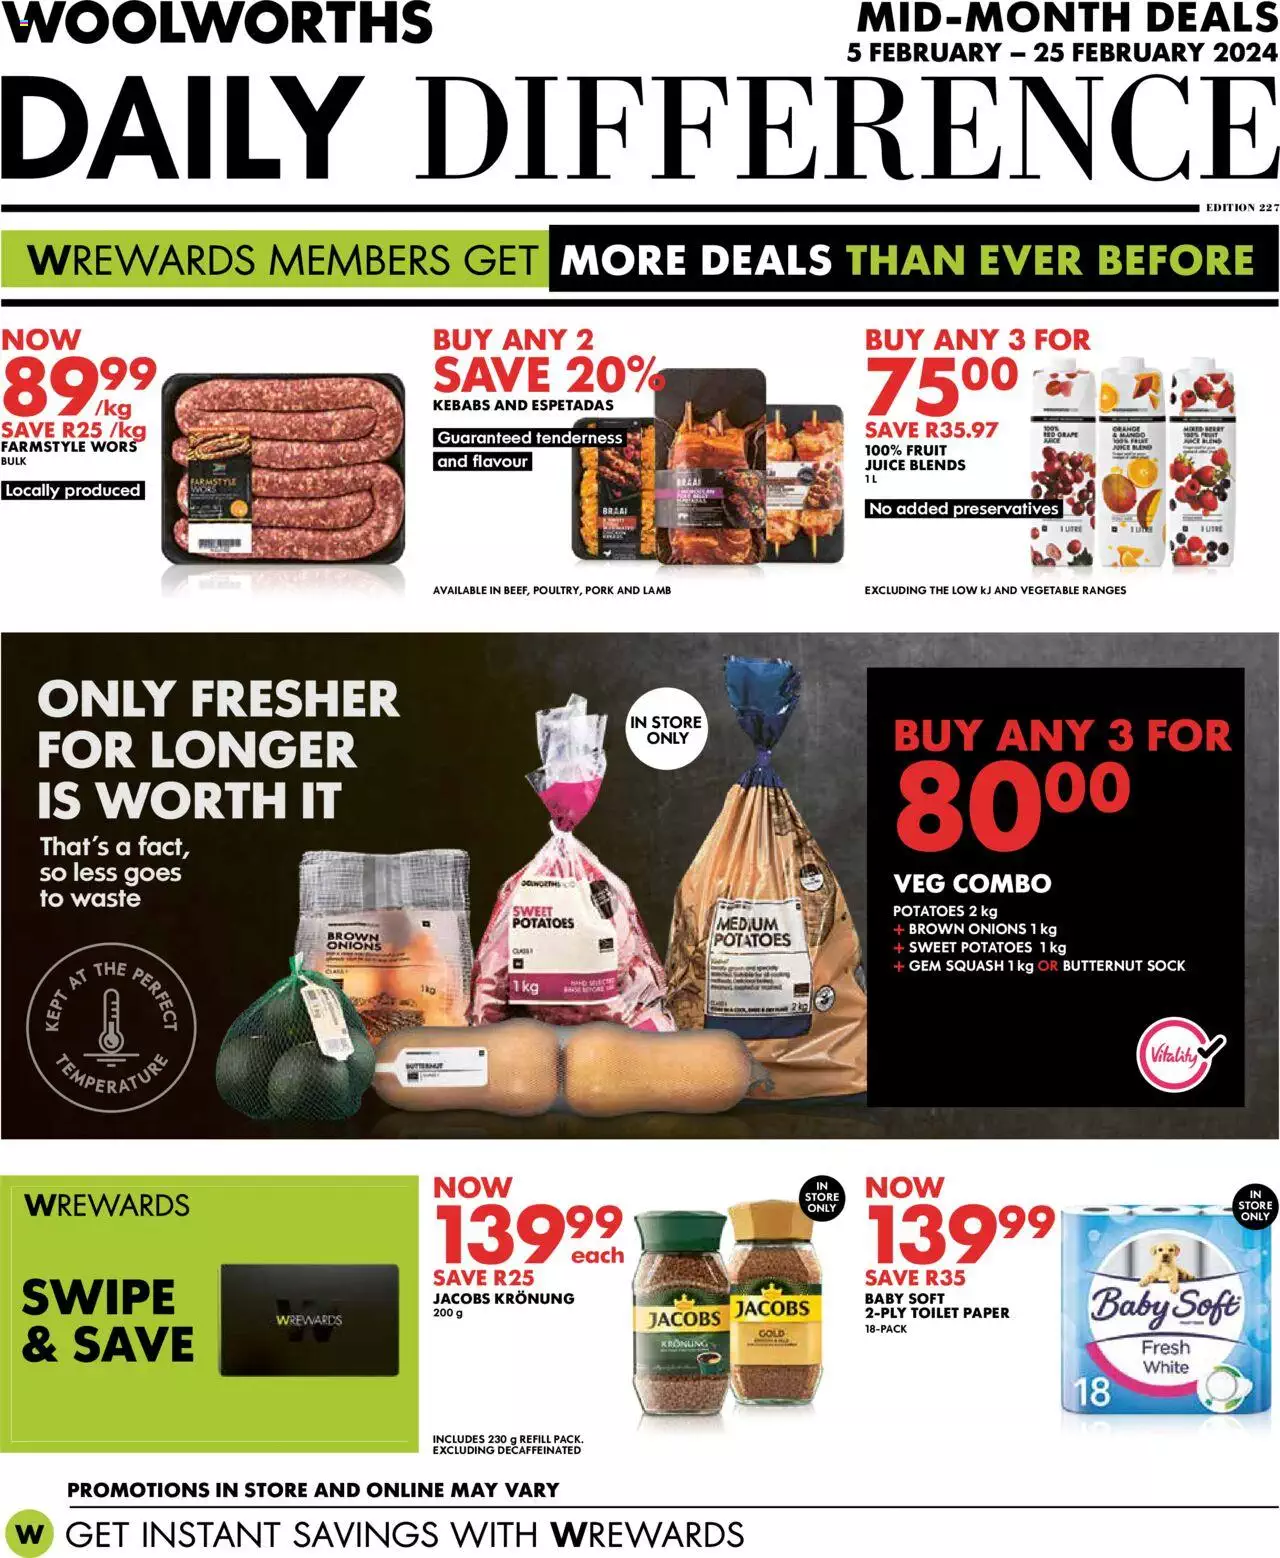 Woolworths Specials 5 – 25 February 2024